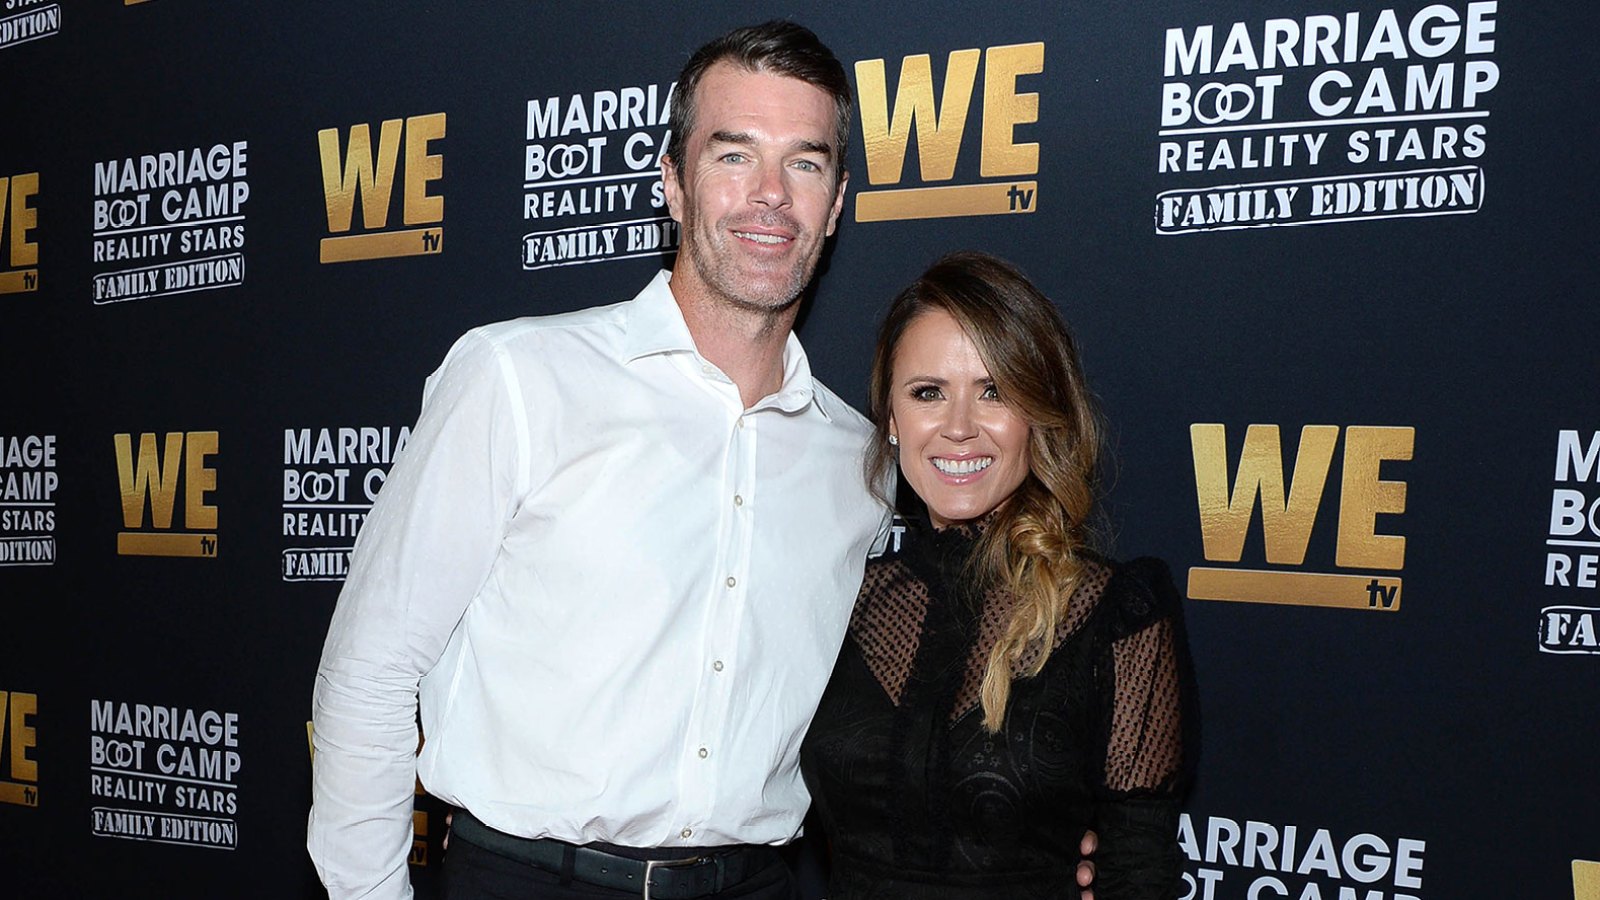 Ryan Sutter Reveals He Had Knee Replacement Surgery Amid Lyme Disease Battle 3